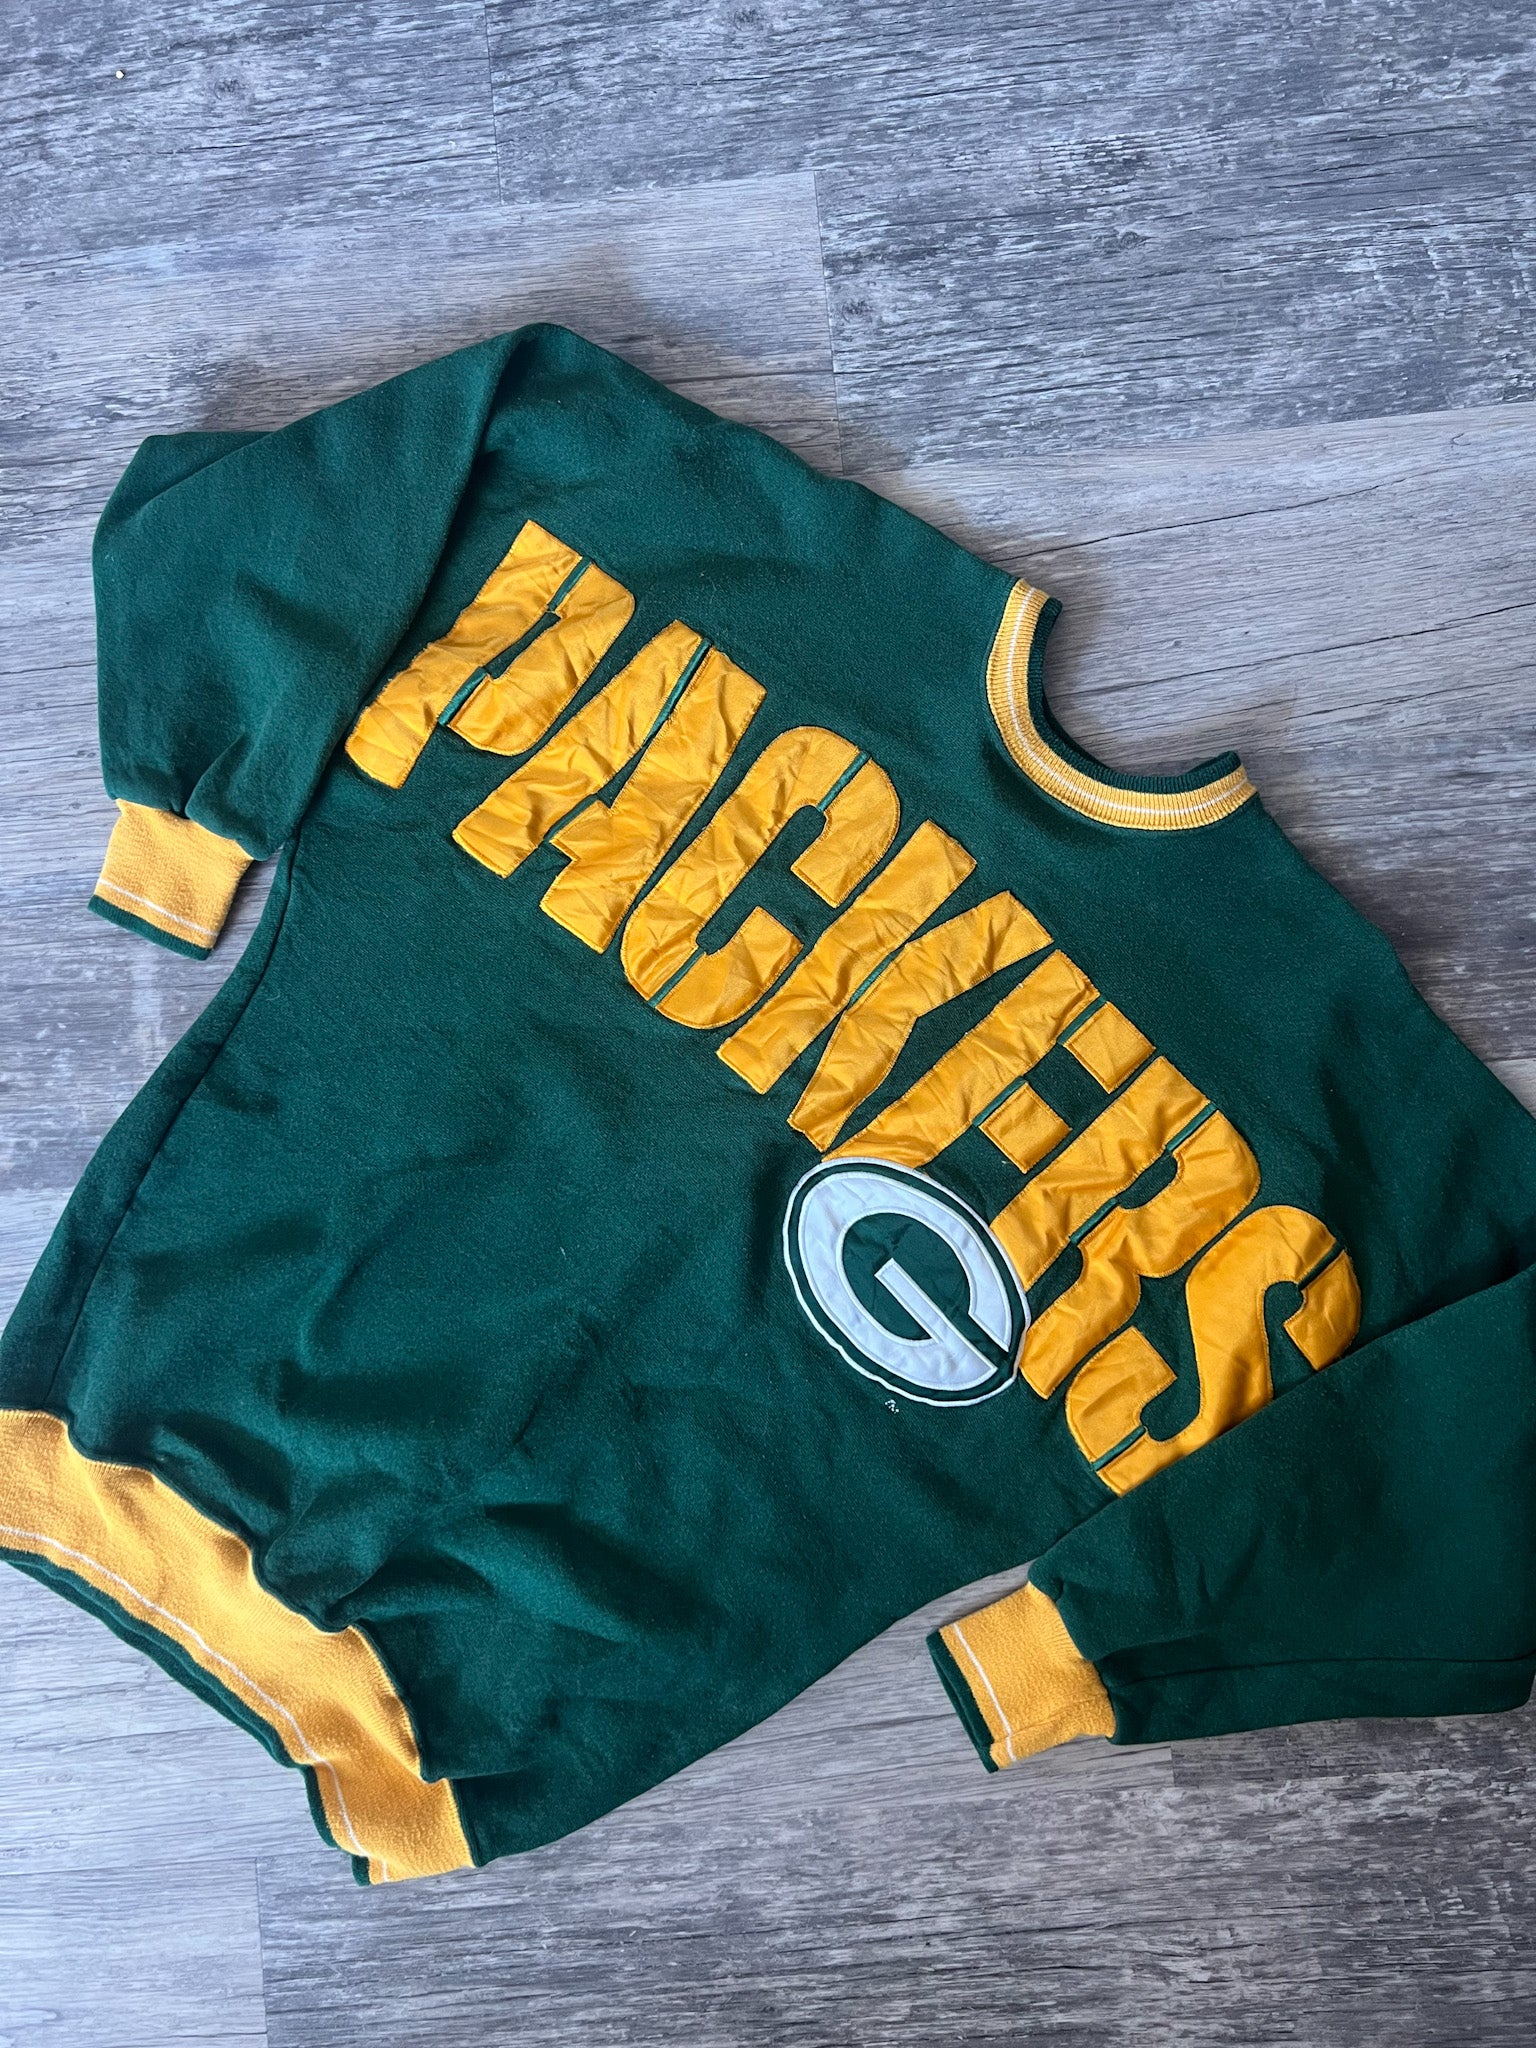 packers vintage clothing